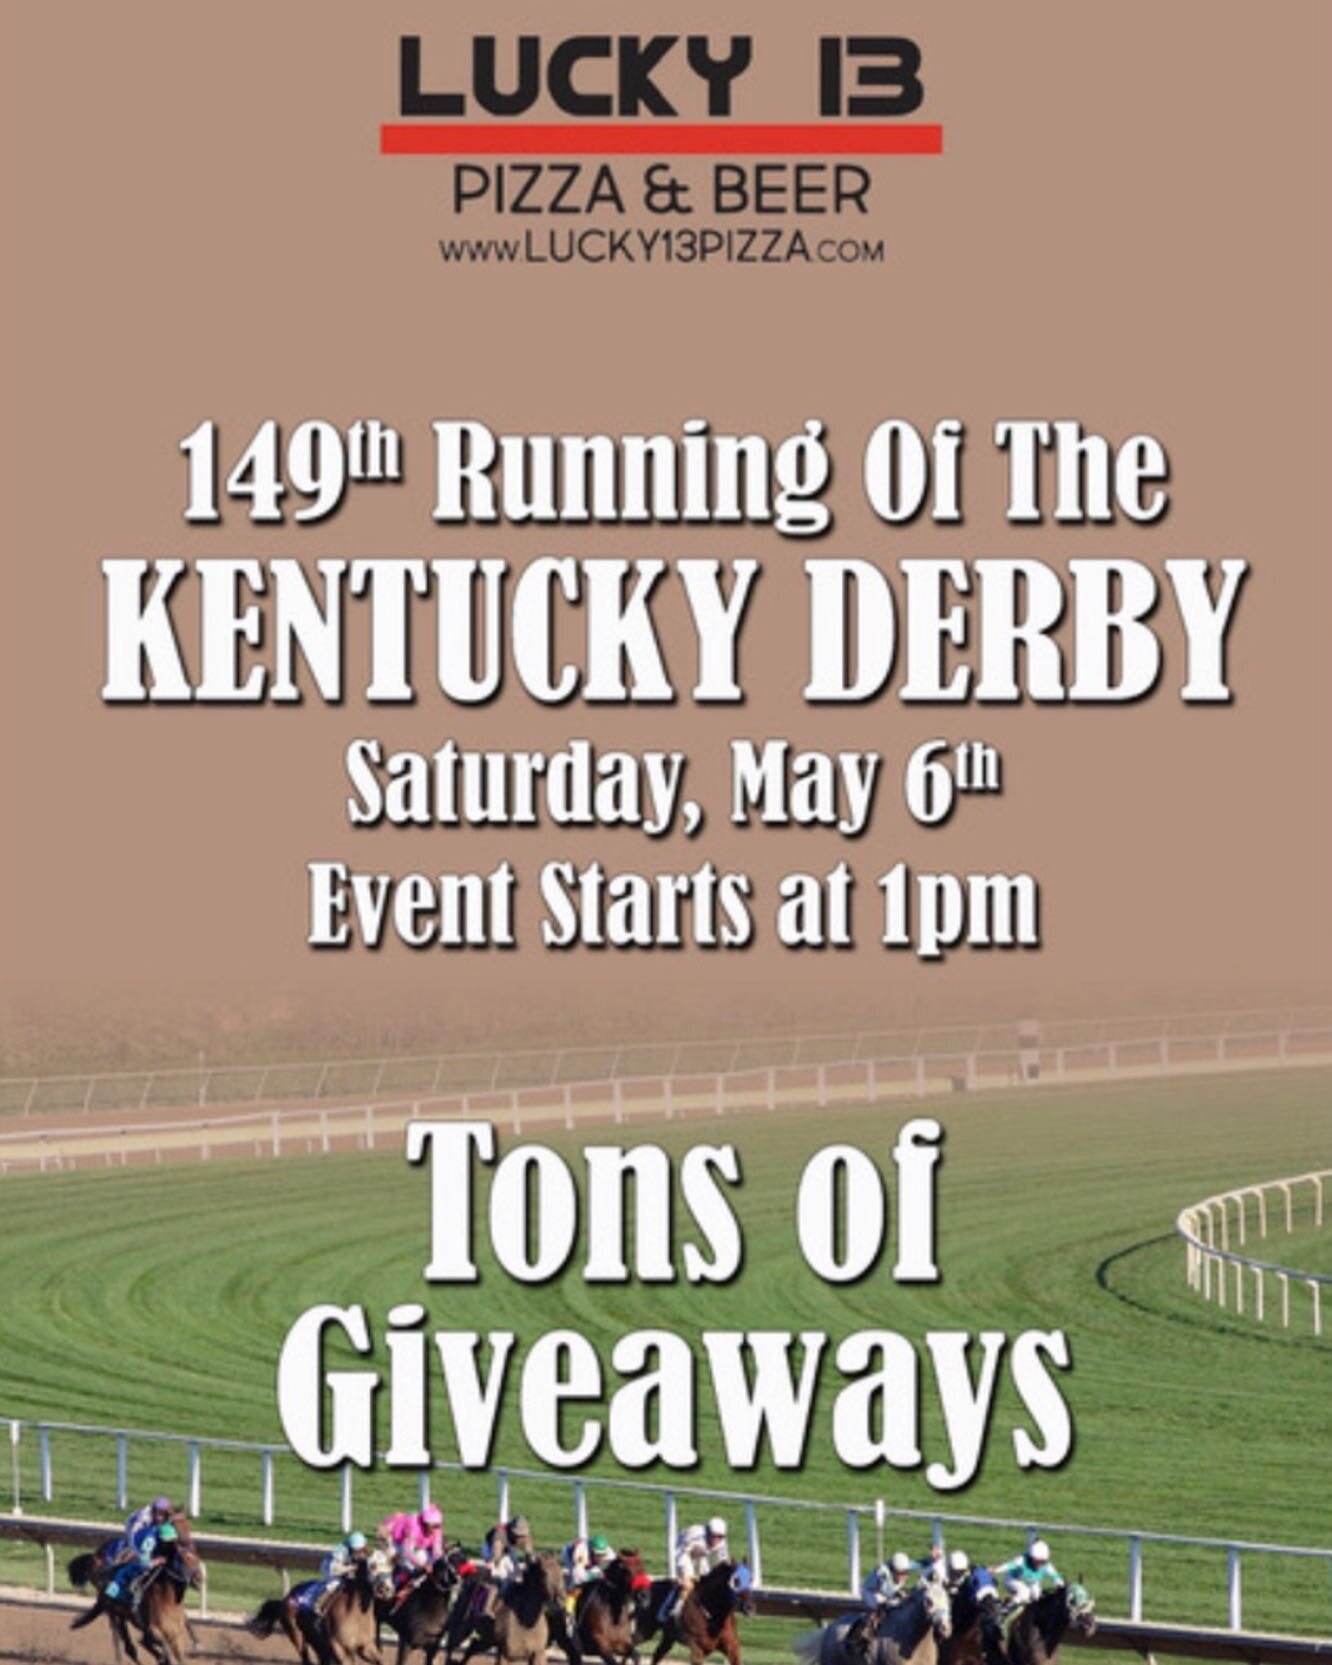 Join us at @lucky13pizza on Sat. May 6th for the Kentucky Derby. We will have Mint Juleps, best dressed contest, tons of giveaways and prizes. Grab your big hats and blazers and we&rsquo;ll see you at @lucky13pizza